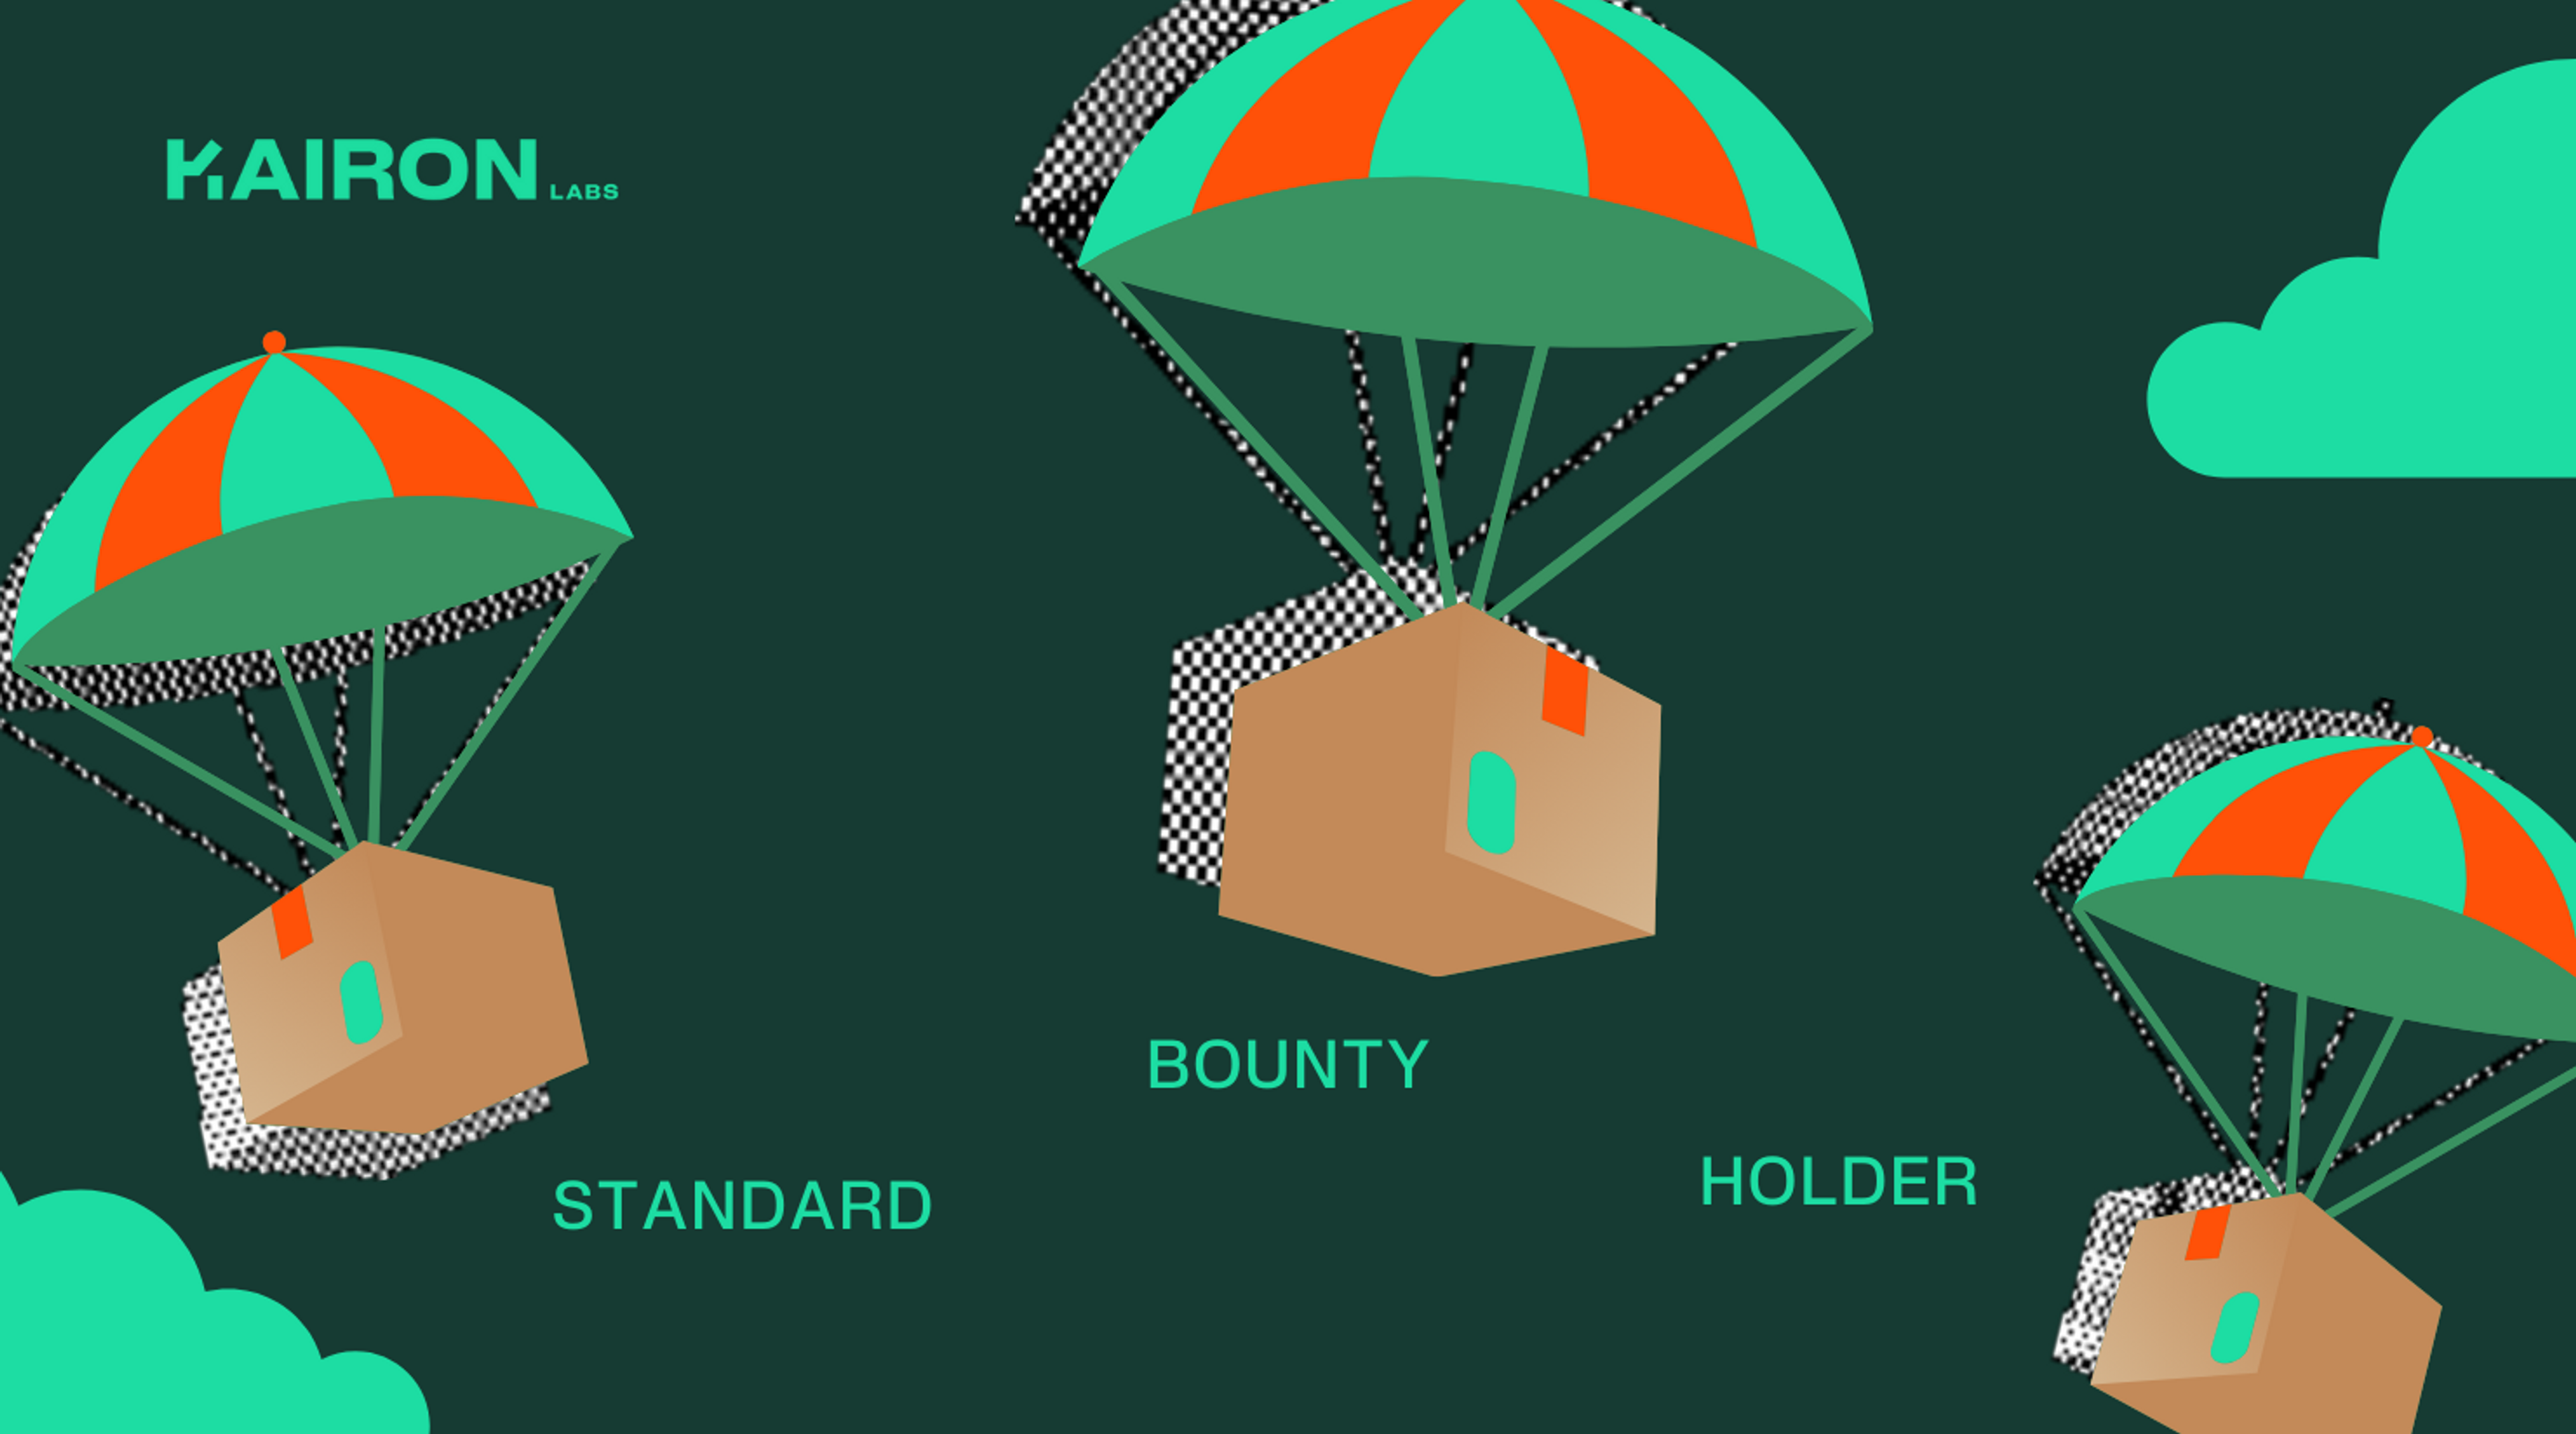 Types of Airdrops - Standard, Bounty, Holder